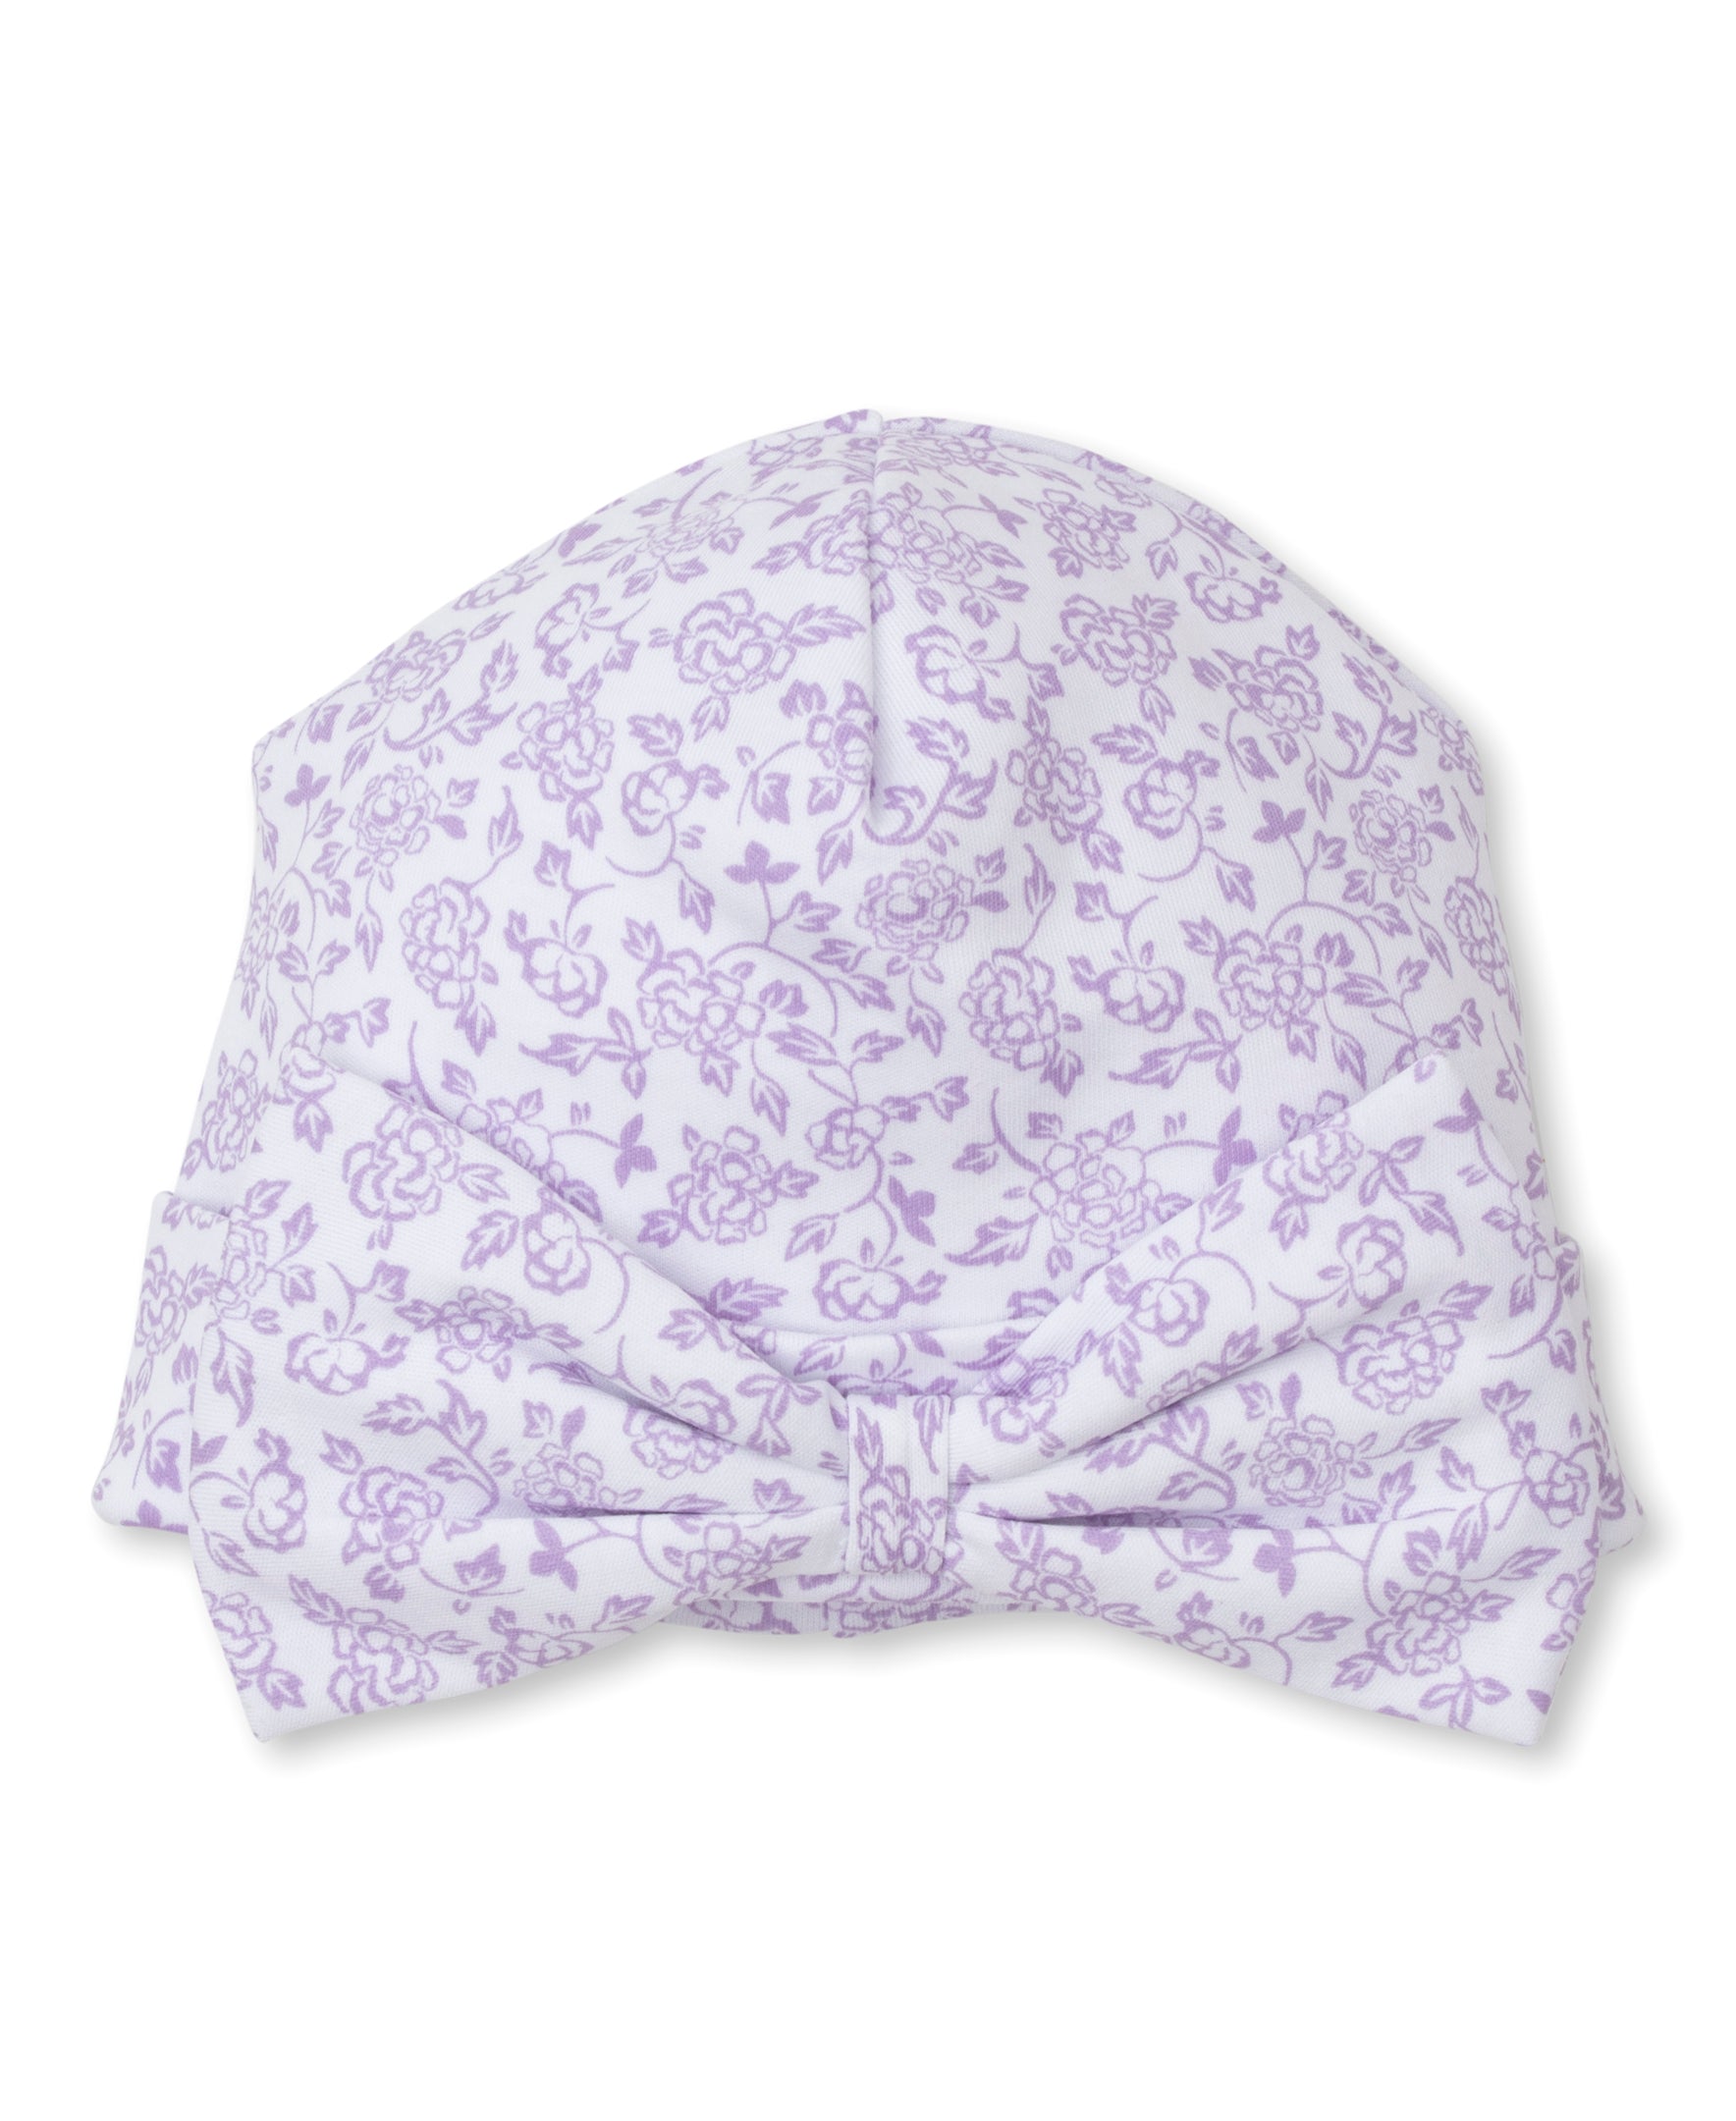 Blooming Vines Lilac Novelty Hat - Kissy Kissy